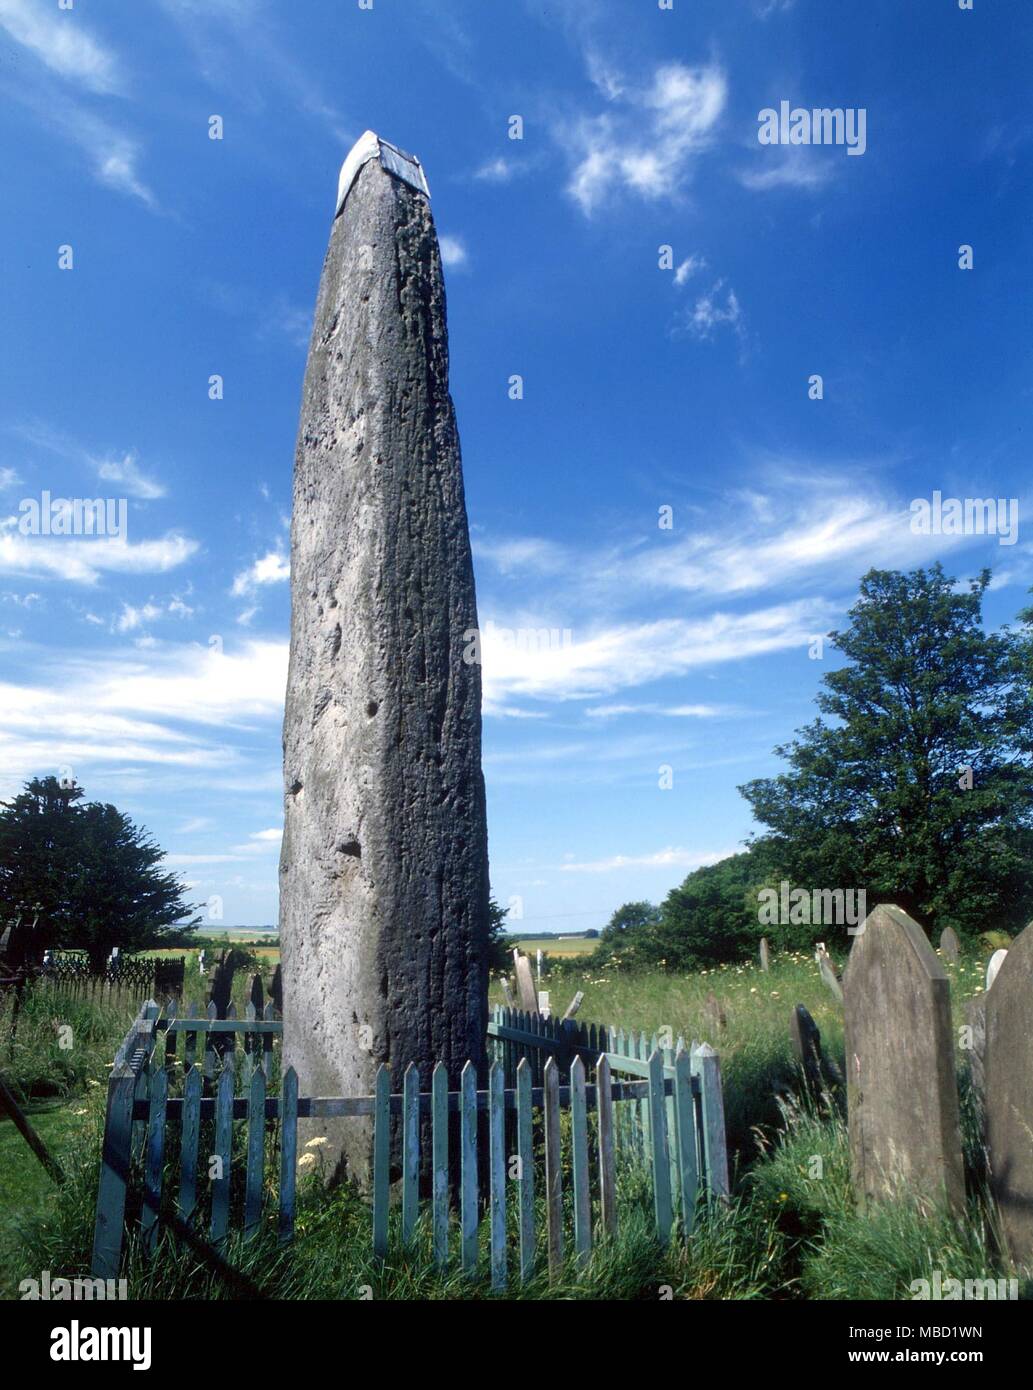 Strones - Rudstone Monolith. The highest monolithic standing stone in Britain, in Rudstone churchyard (Humberside), towers 25 feet from the ground. It is said to weigh over 40 tons. The Devil is said to have flung the stone at the church and missed Stock Photo